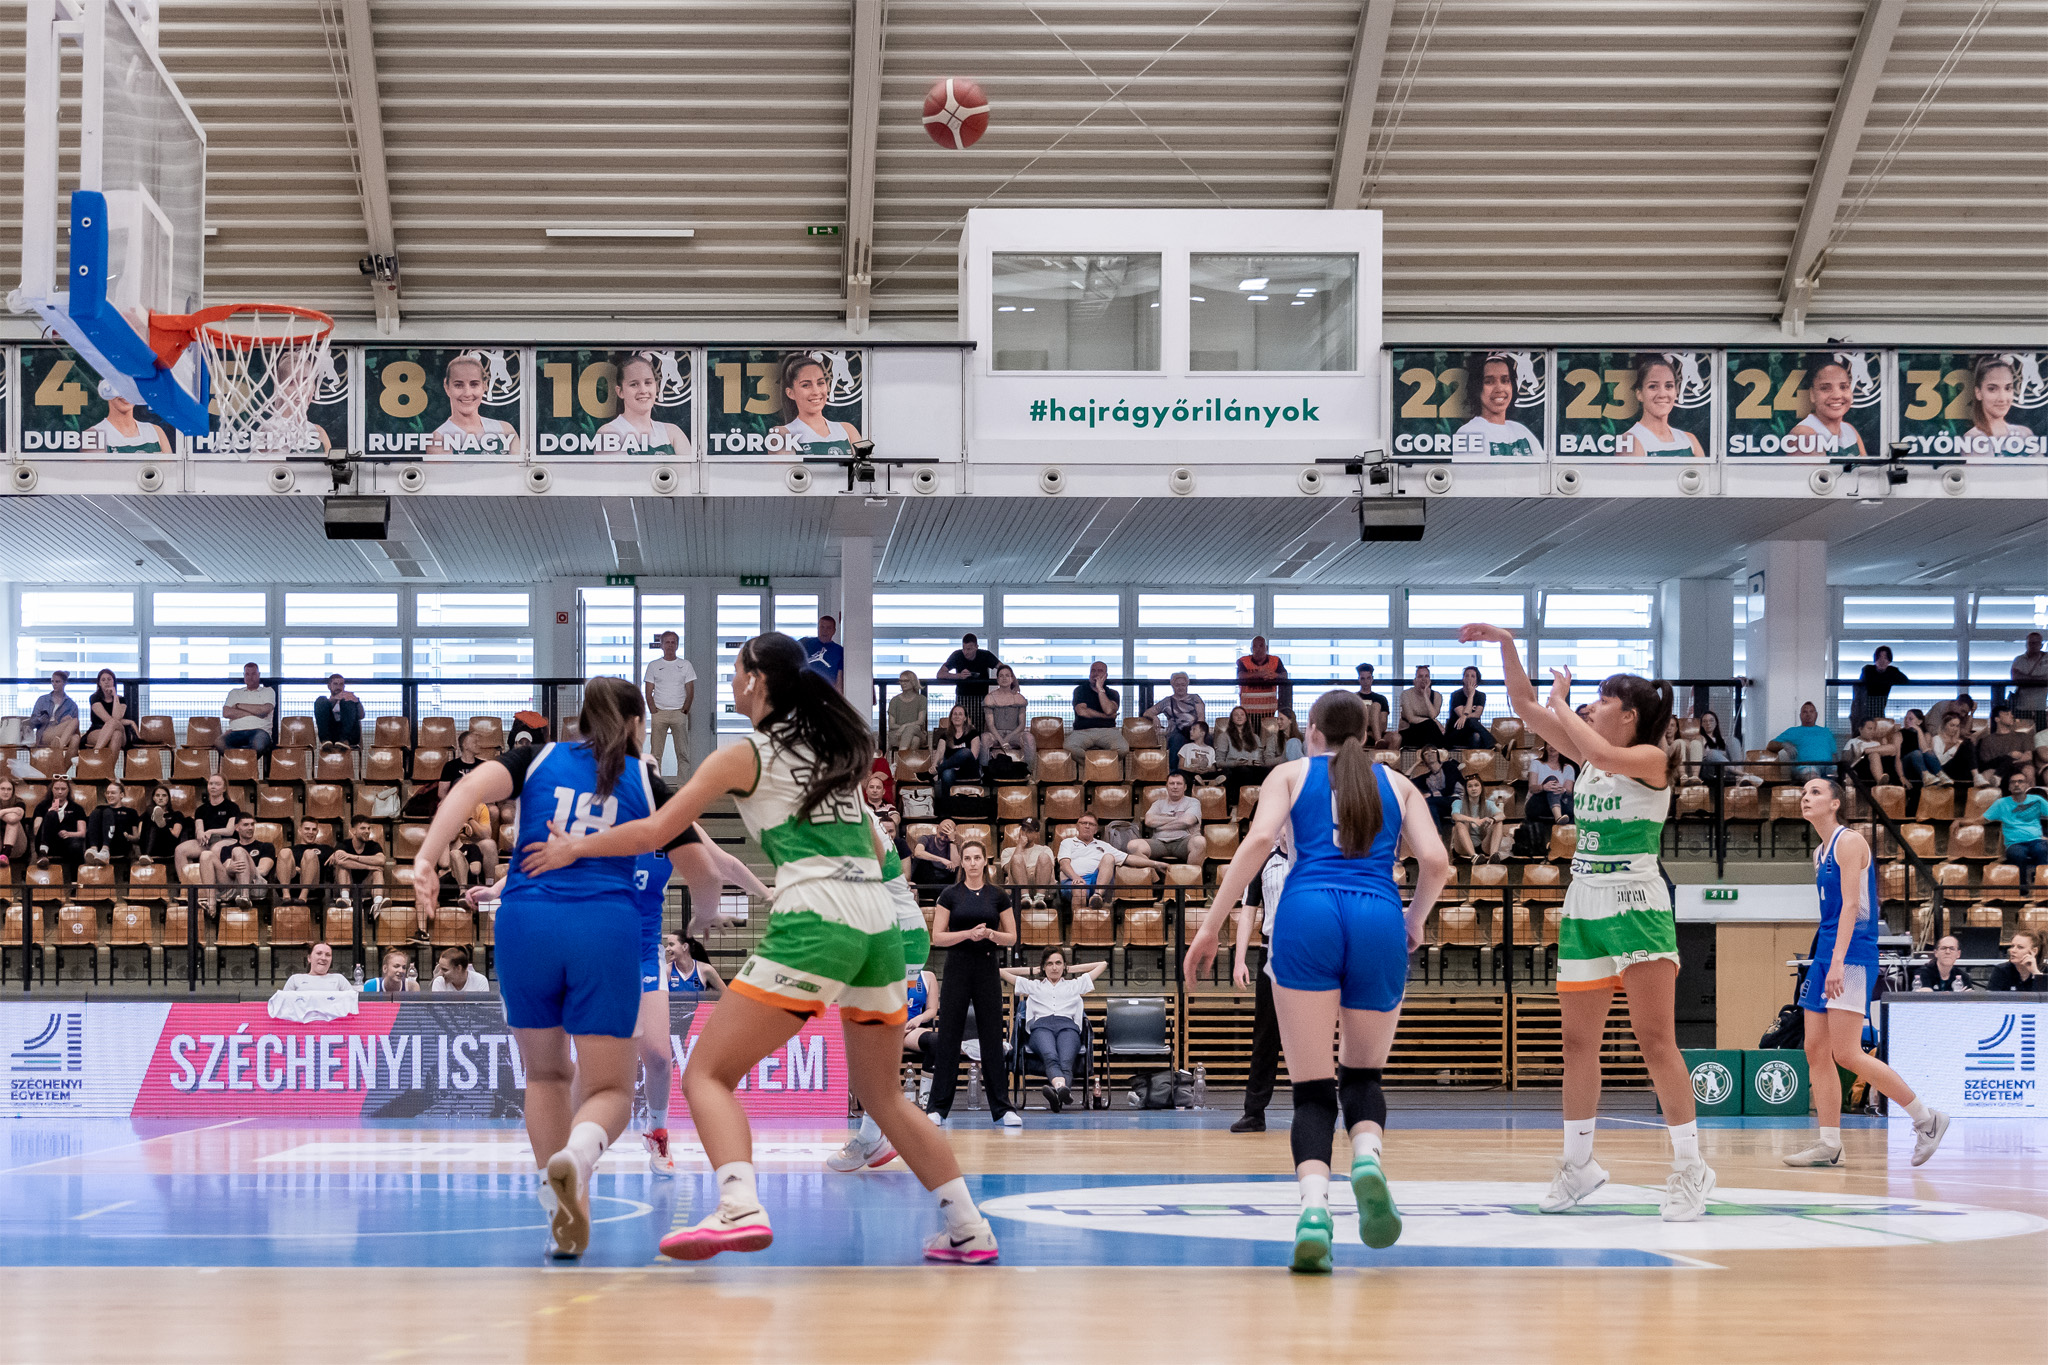 Both the men's and women's 3x3 basketball teams of Széchenyi István University will compete at the European University Games